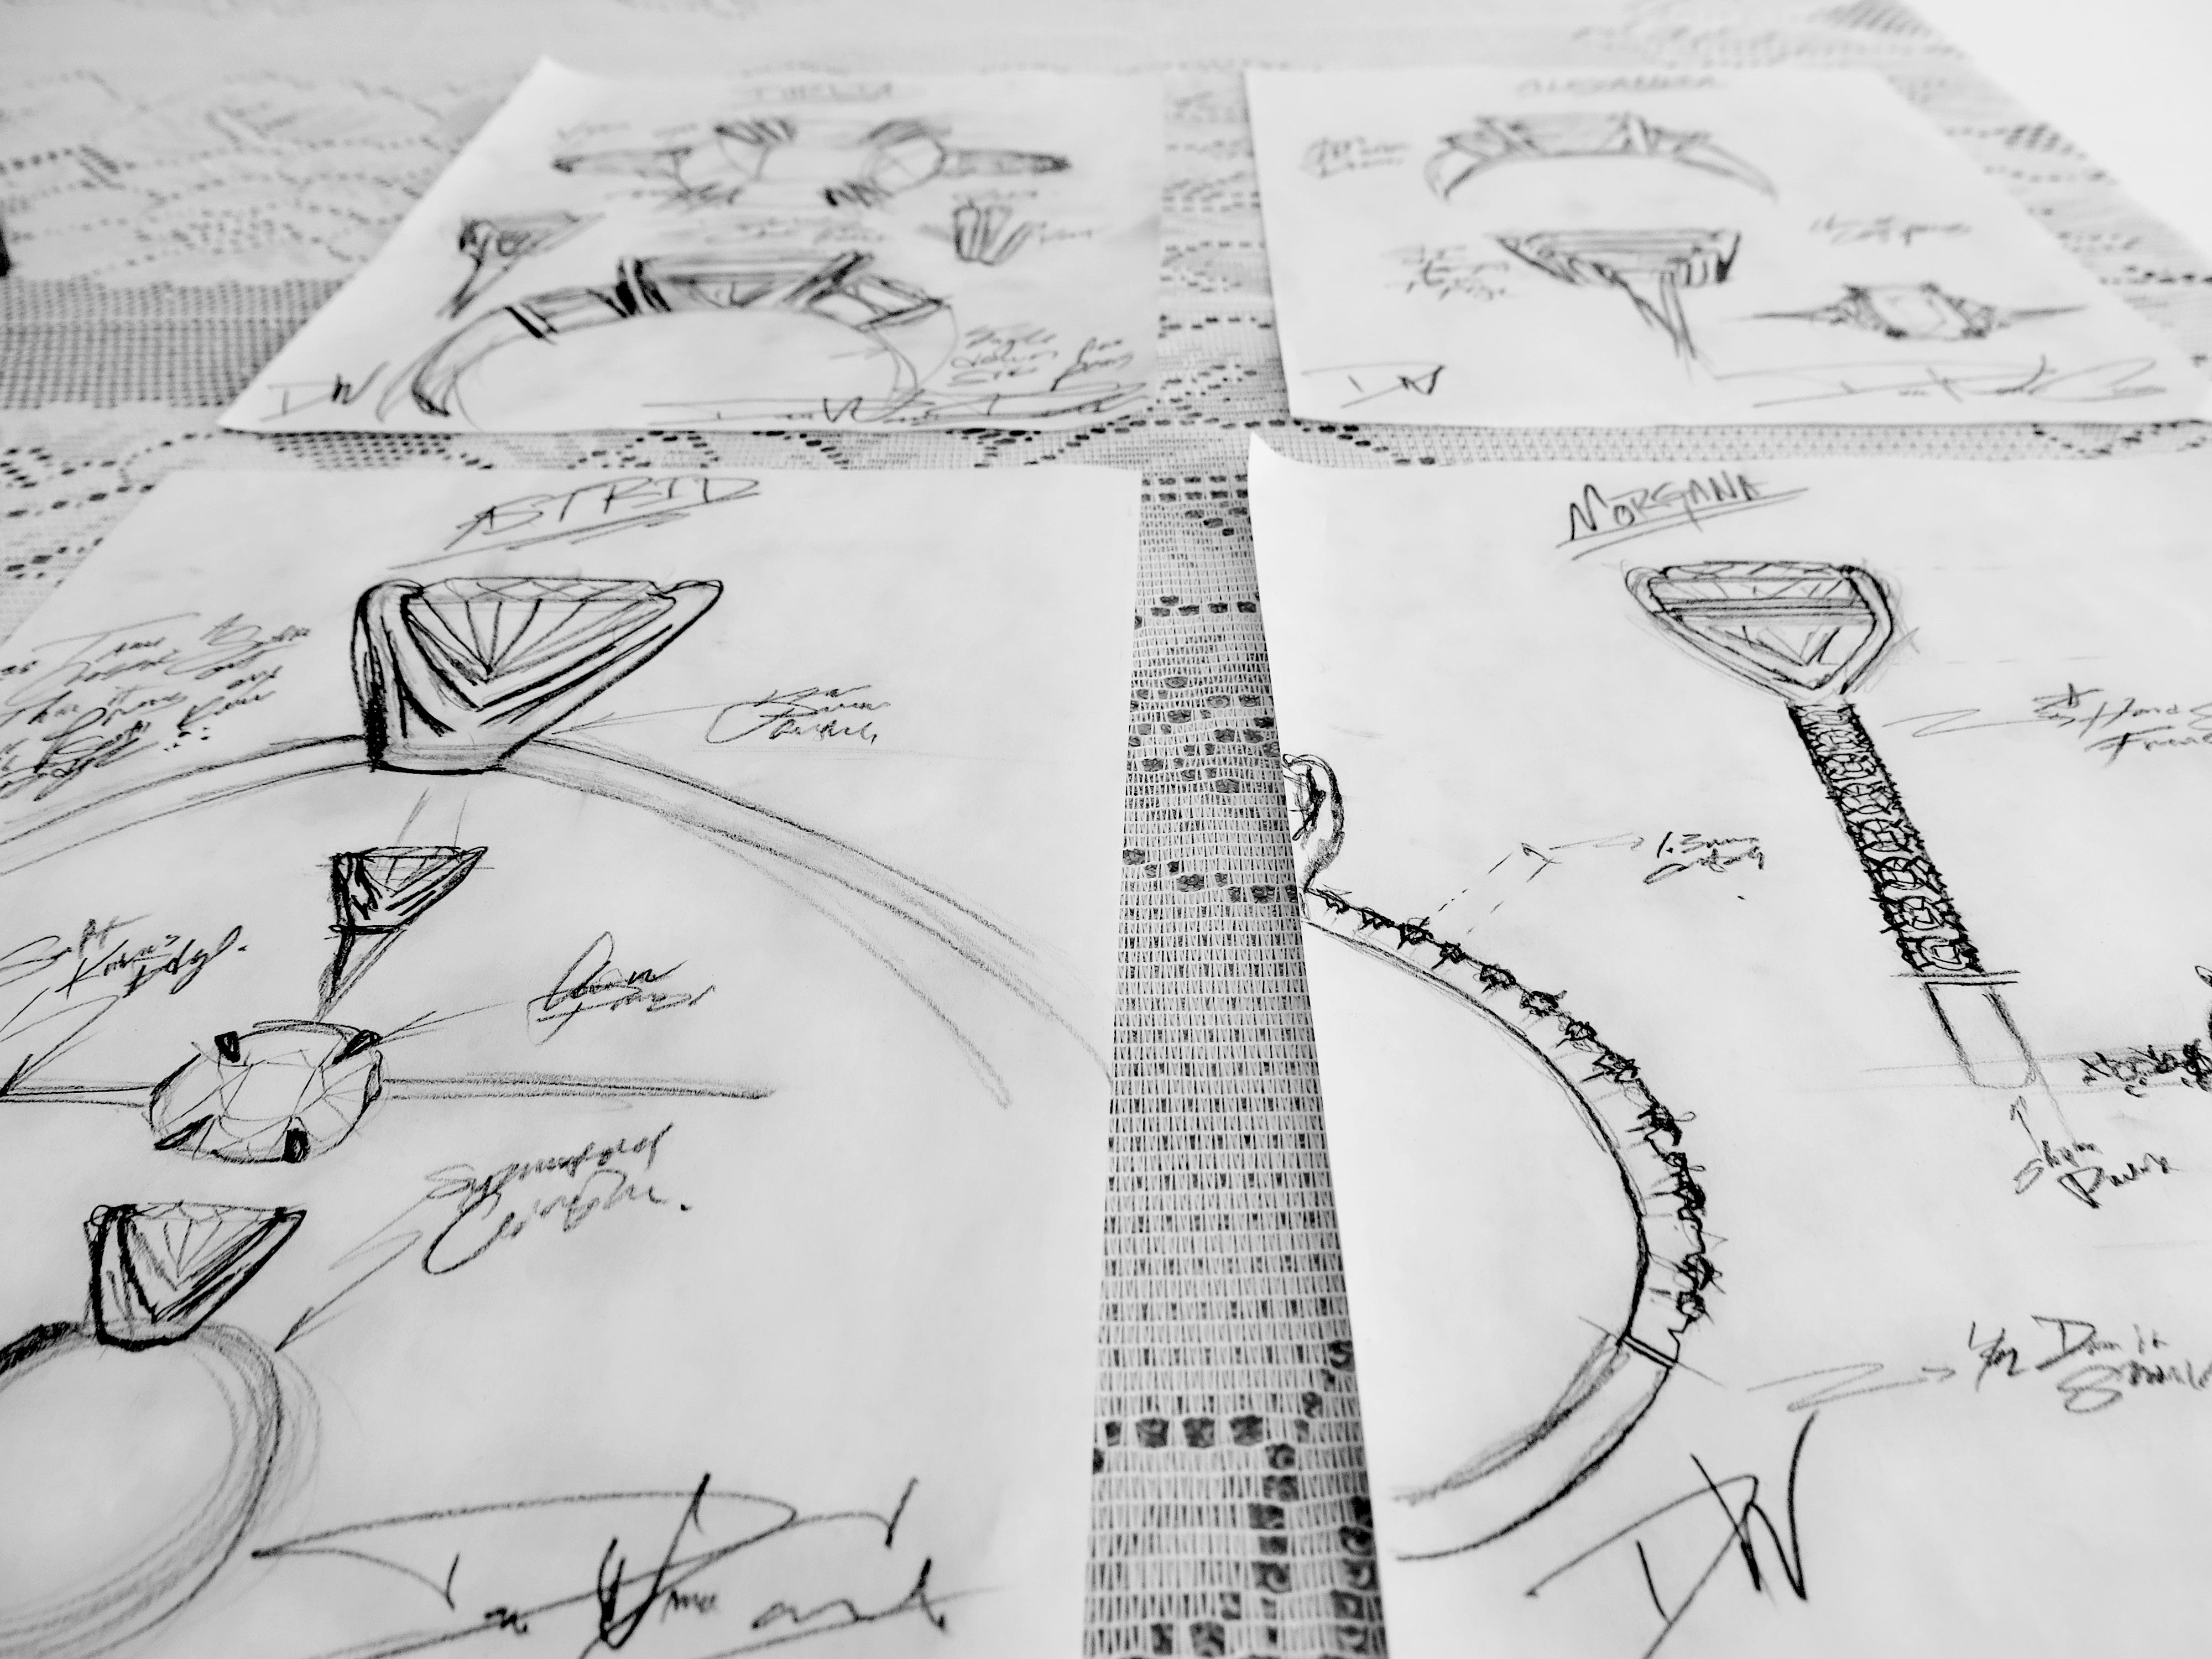 Drawing Jewelry Design. Drawing Sketch Jewelry on Paper . Design Studio.  Creativity Ideas. Stock Image - Image of fashion, finger: 204197599